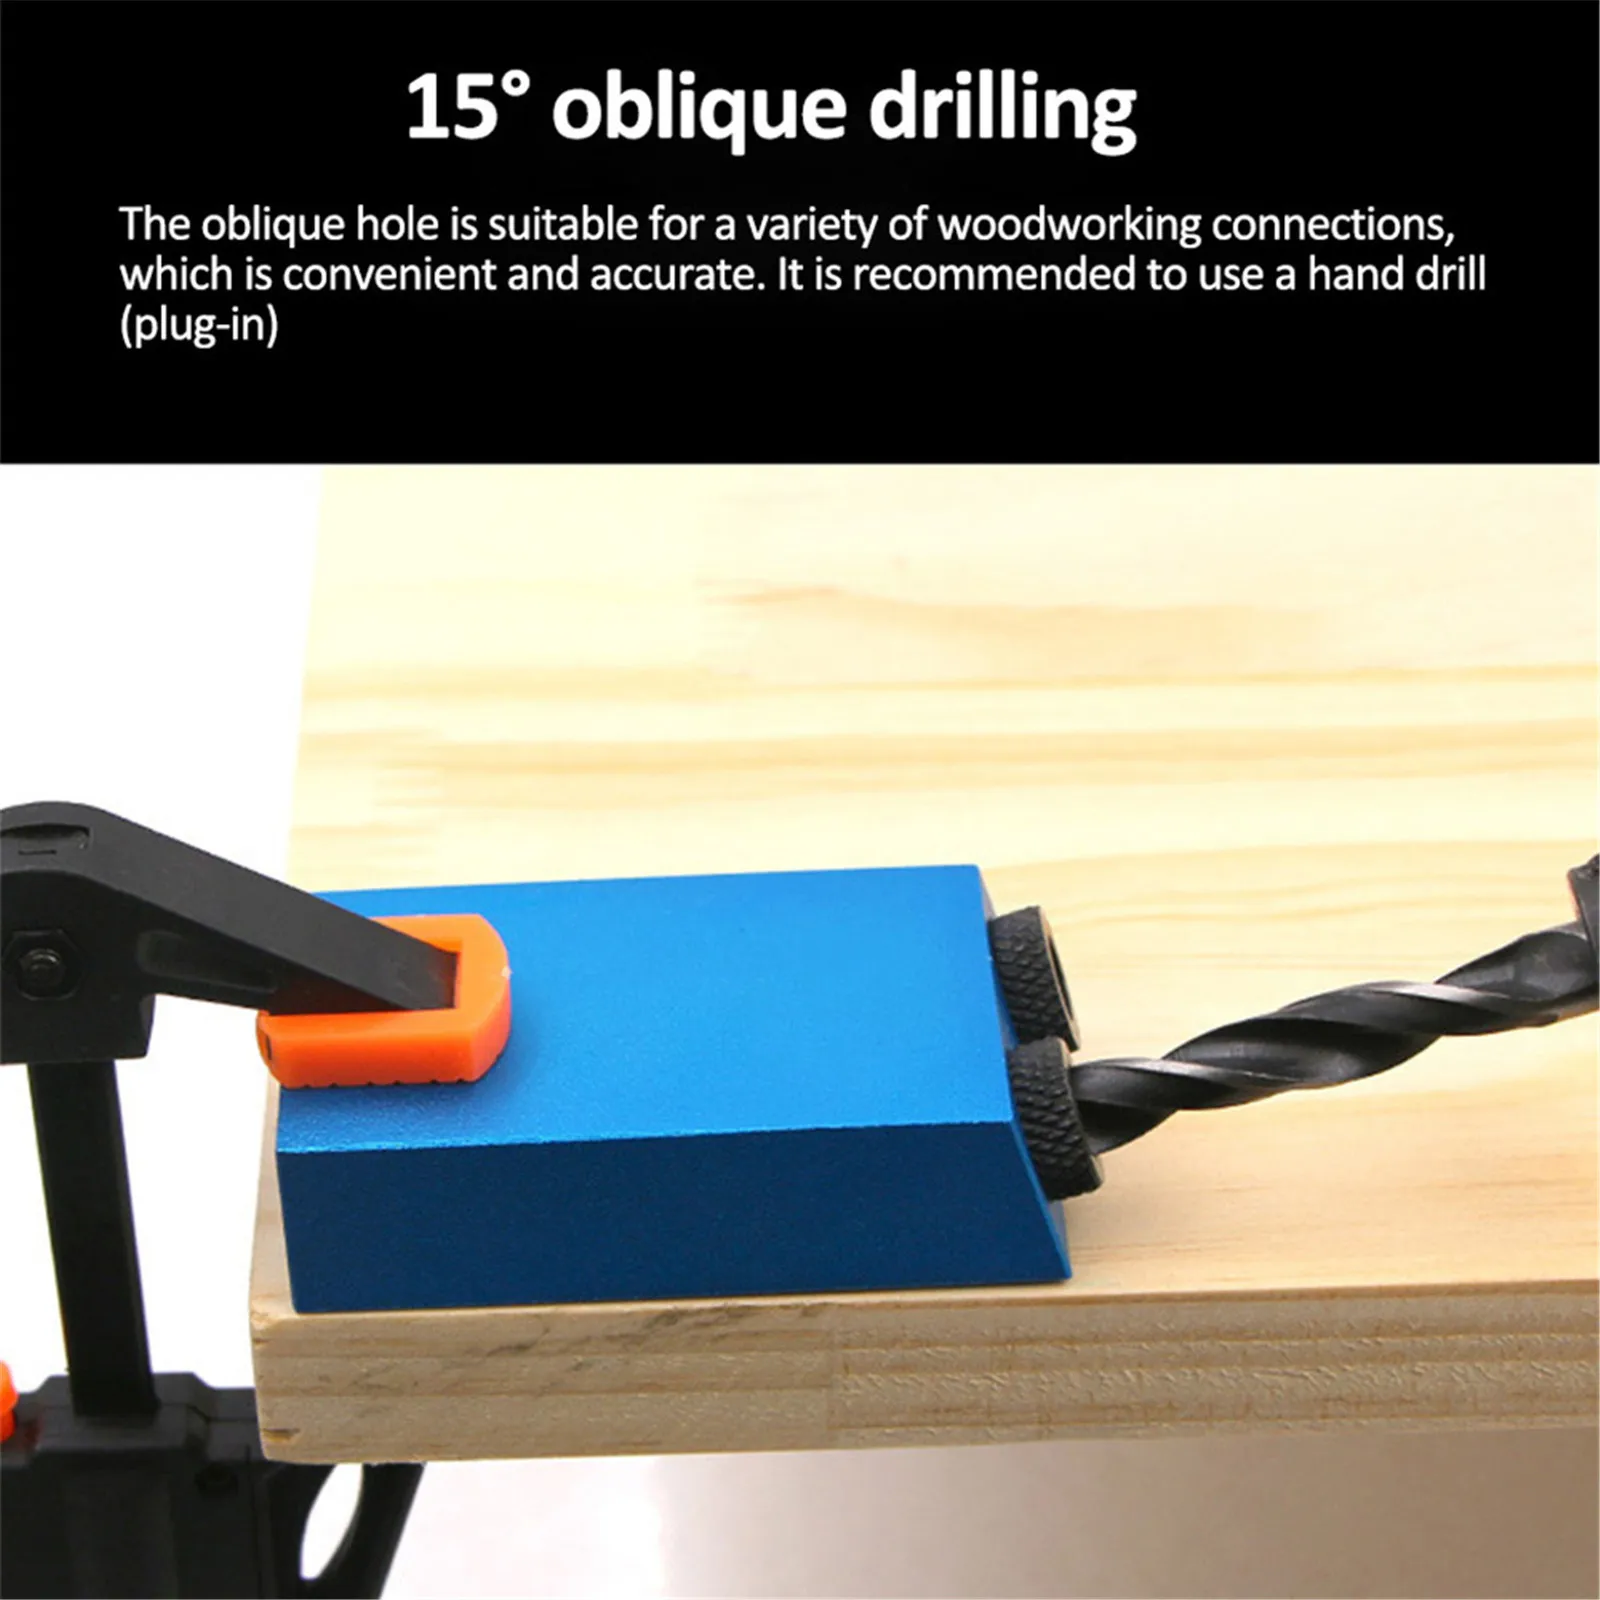 15 Degrees Hole Jig Kit Woodworking Hole Punch Locator Hole Puncher Locator Jig Woodworking Tool woodworking punch locator carpenter job tools hand tools handheld drill bit hole puncher dowel drill jig 6 8 10mm orange blue